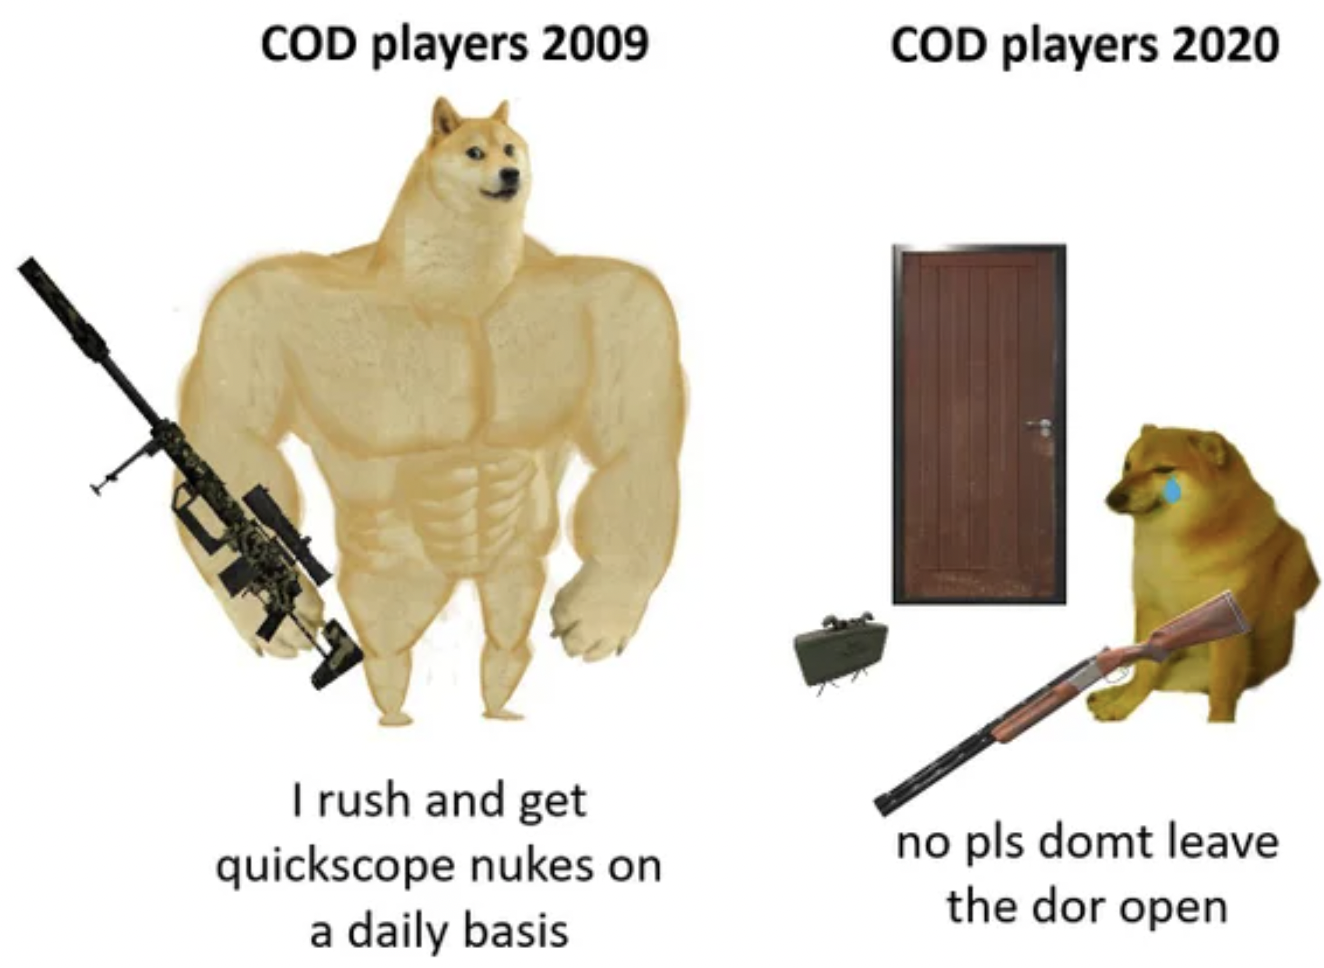 Call of Duty Memes - swole dog meme - Cod players 2009 I rush and get quickscope nukes on a daily basis Cod players 2020 no pls domt leave the dor open